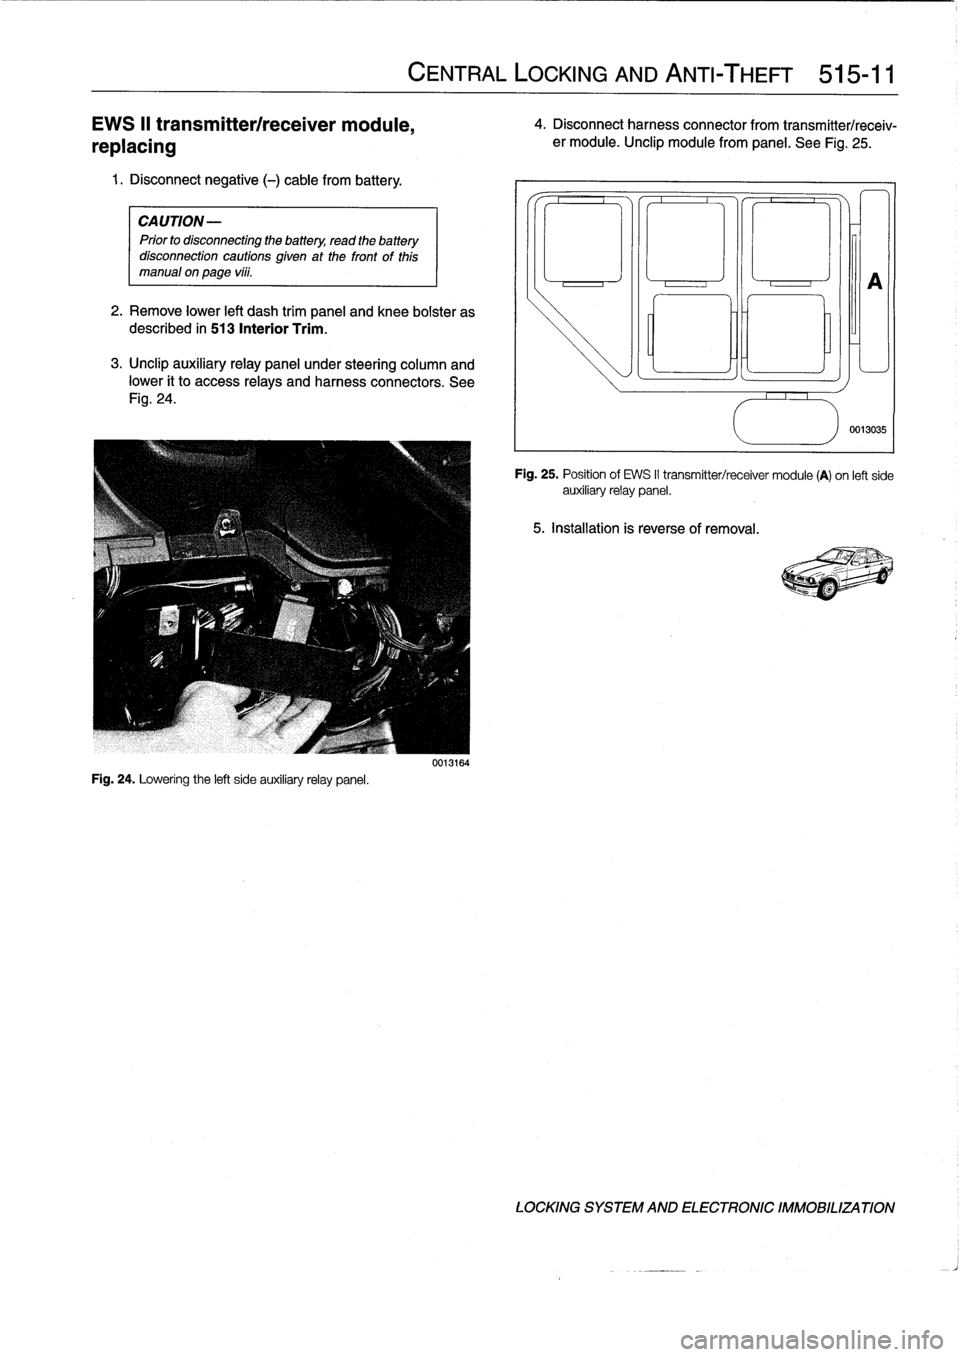 BMW M3 1996 E36 Workshop Manual 
EWS
II
transmitterlreceiver
module,

replacing

1
.
Disconnect
negative
(-)
cable
from
battery
.

CAUTION-

Prior
to
disconnectiog
the
battery,
read
the
battery
disconnection
cautions
given
at
the
fr